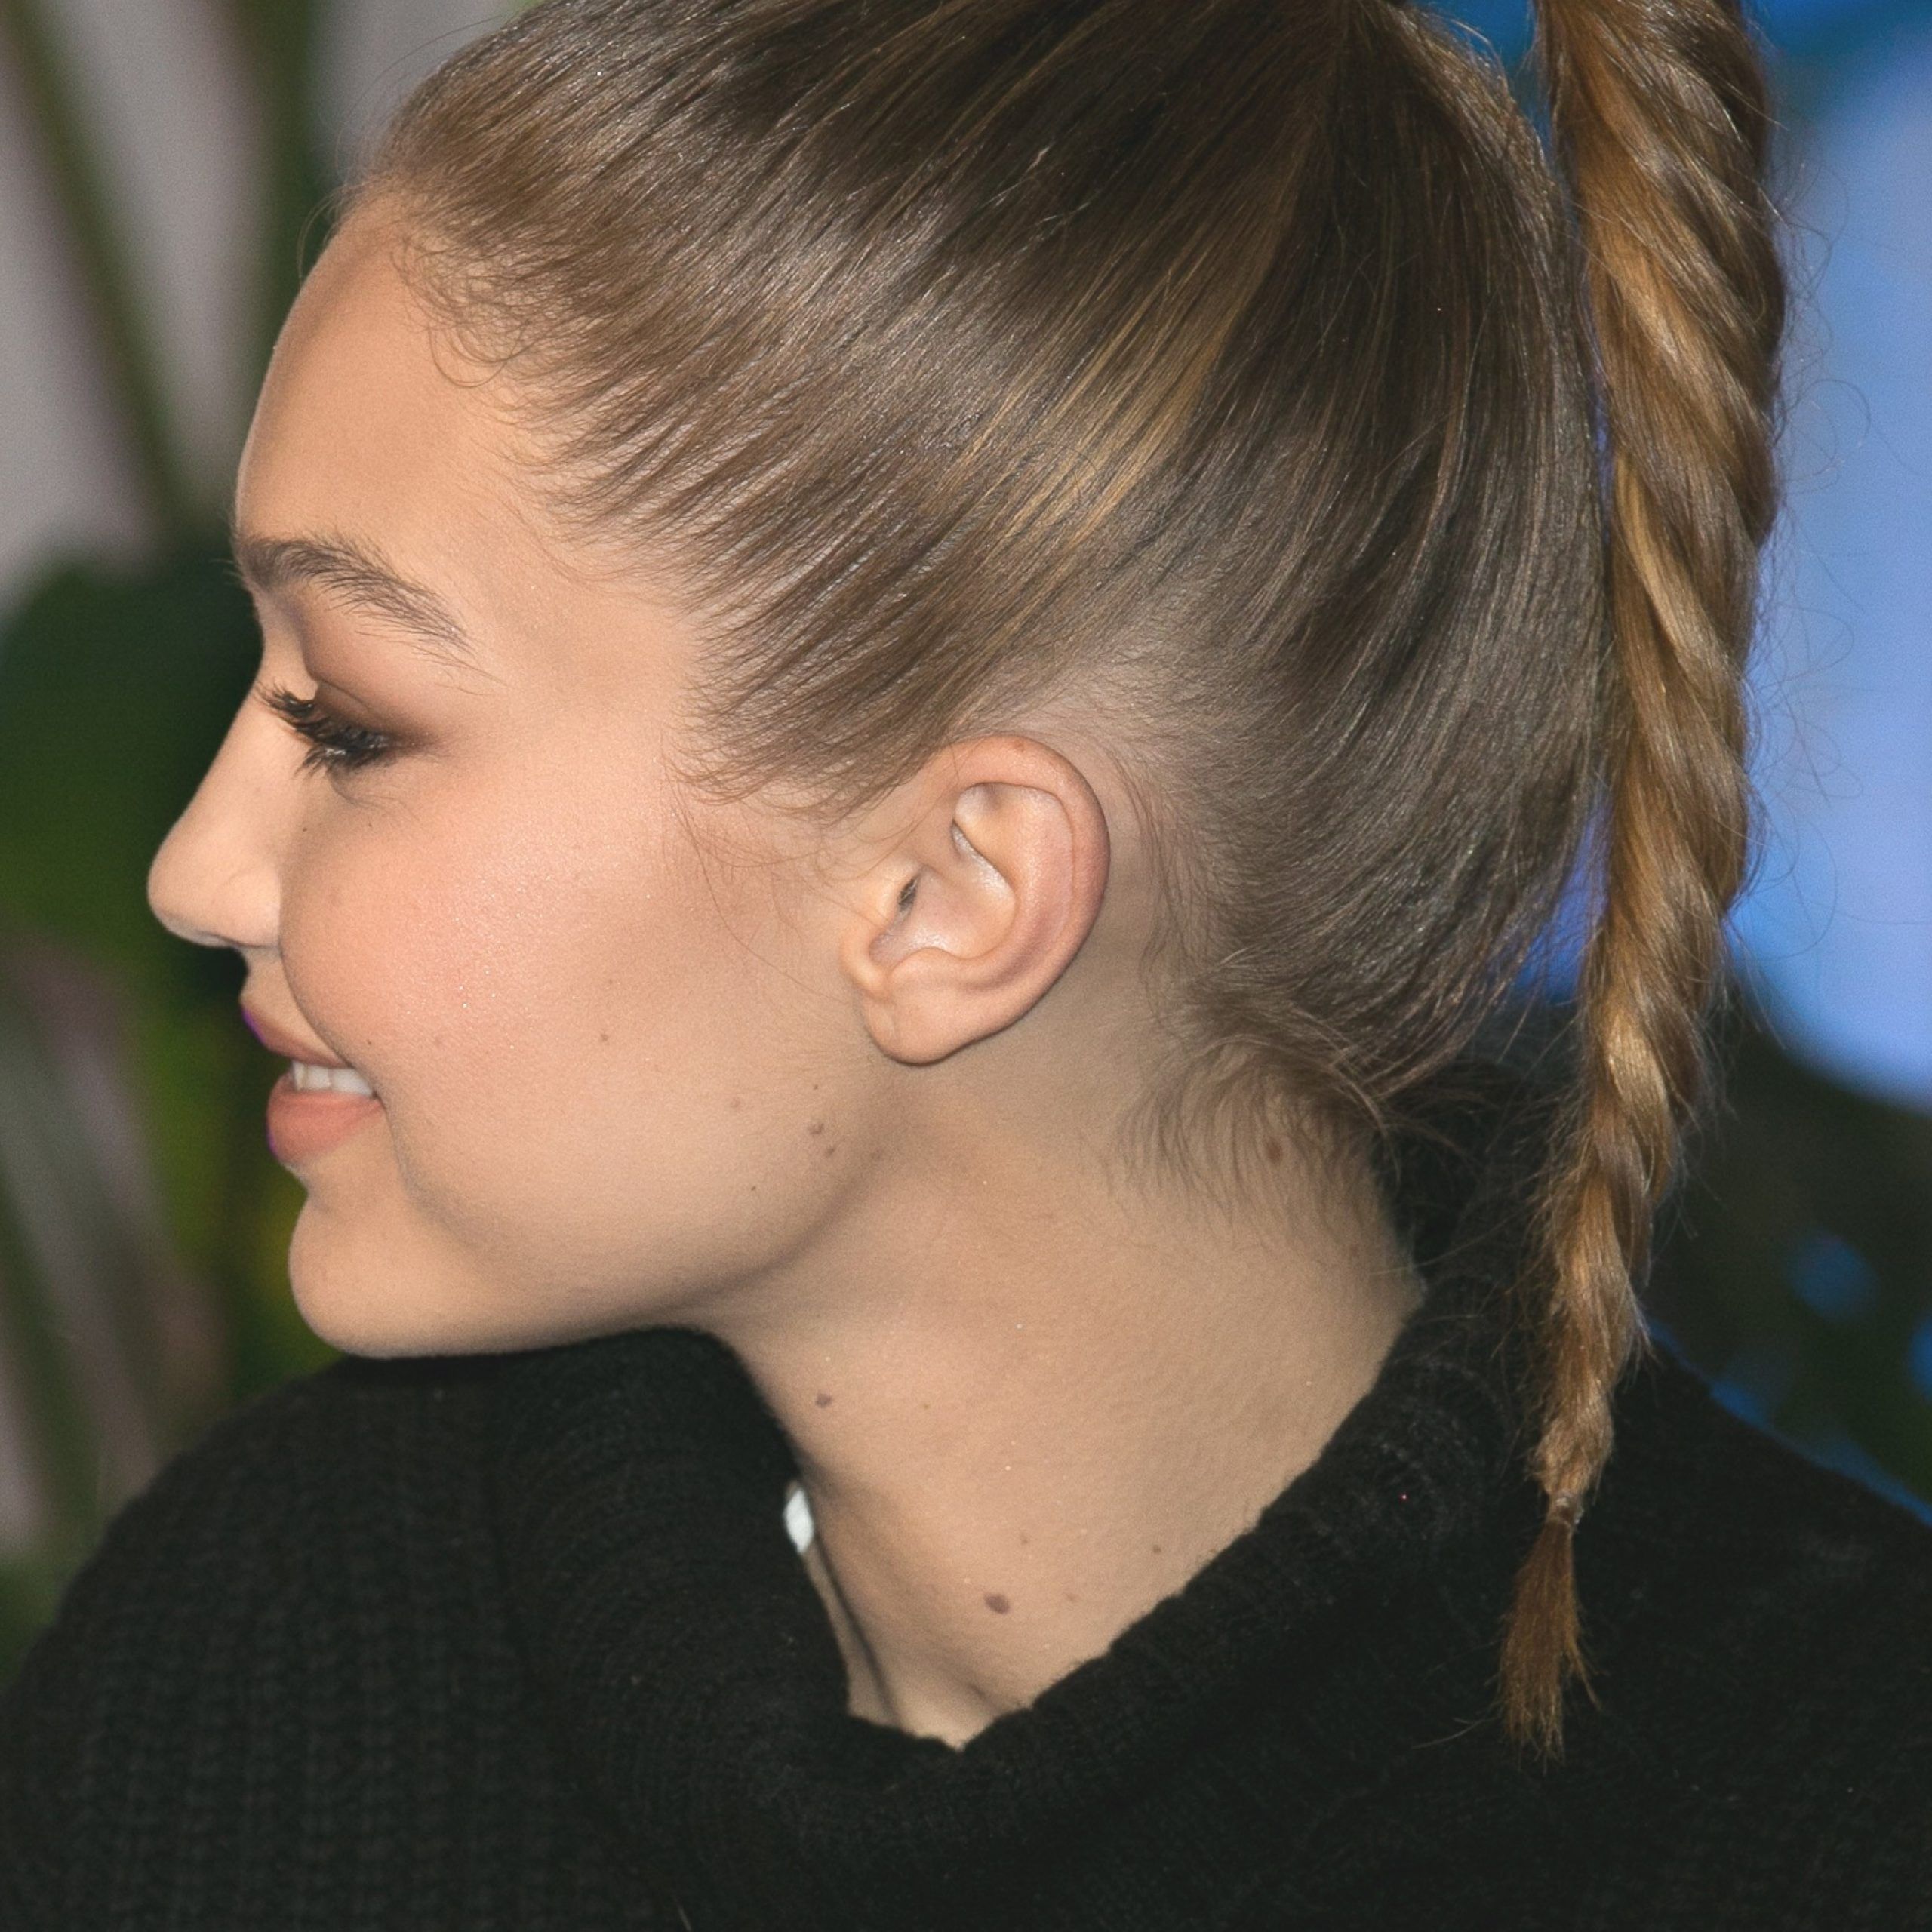 Hairstyles : Braided High Ponytail Hairstyles Licious In Most Popular High Ponytail Braid Hairstyles (View 17 of 20)